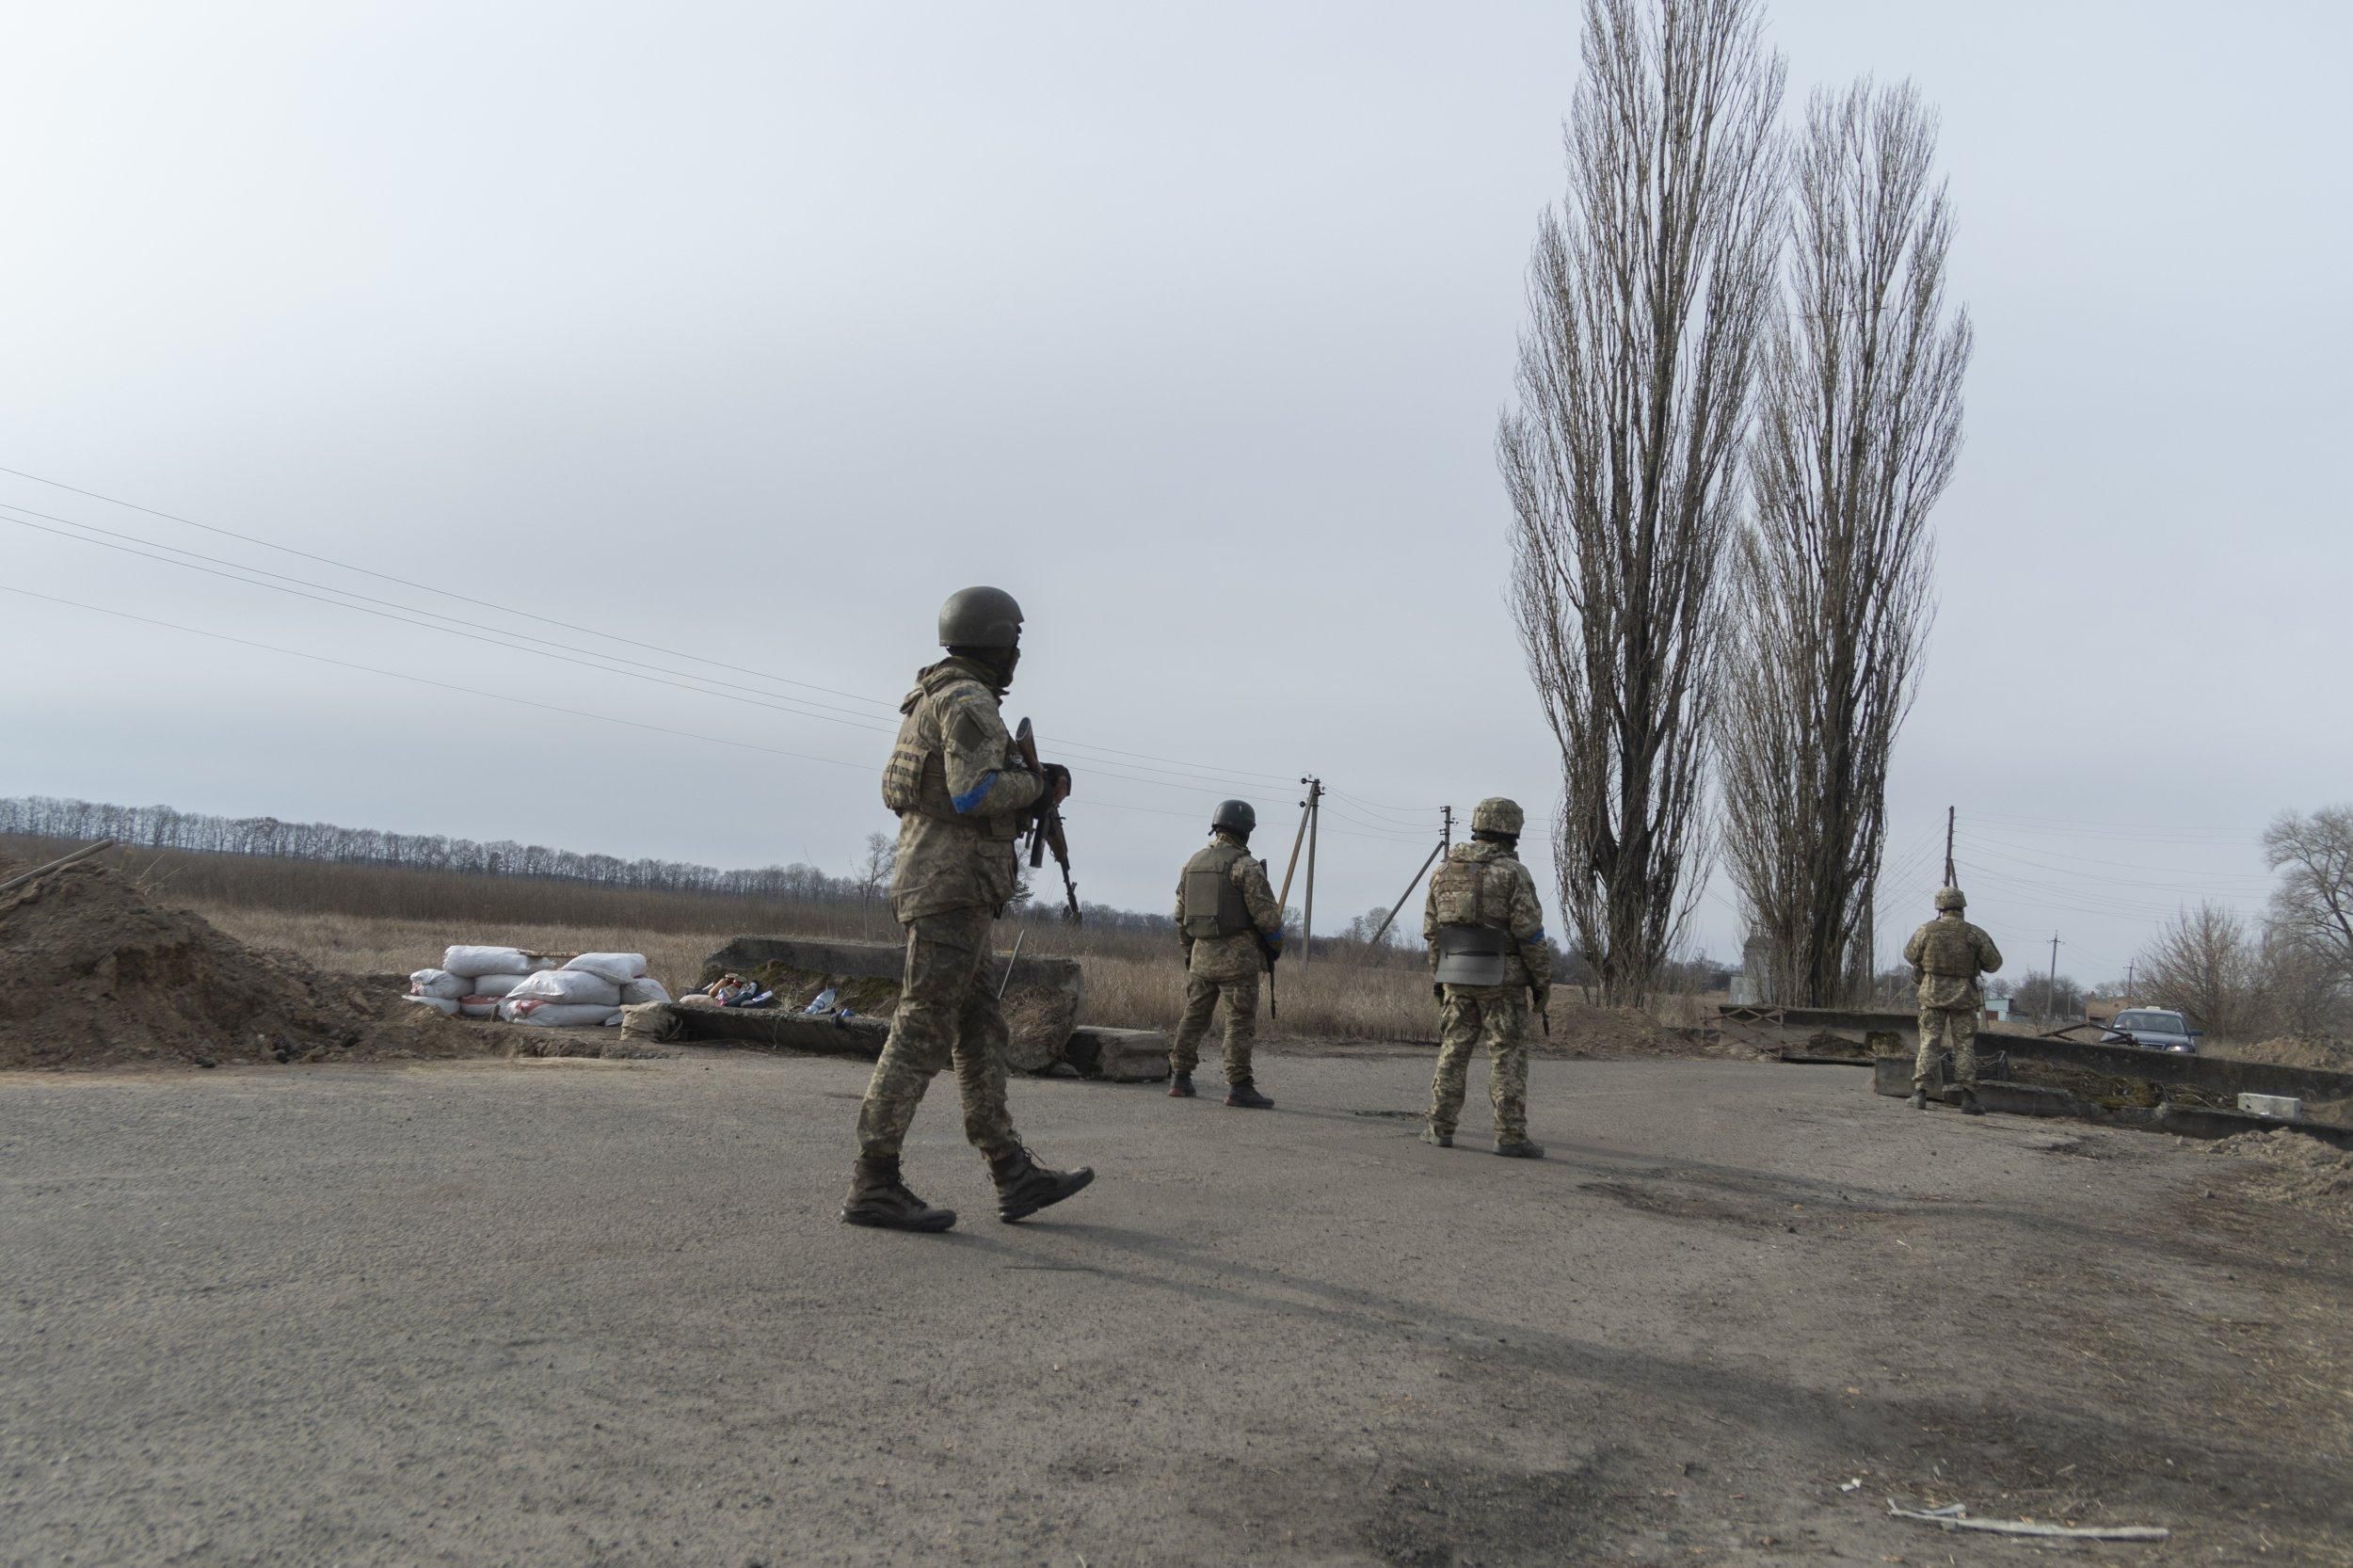 Donbas  the situation as "very difficult" - en